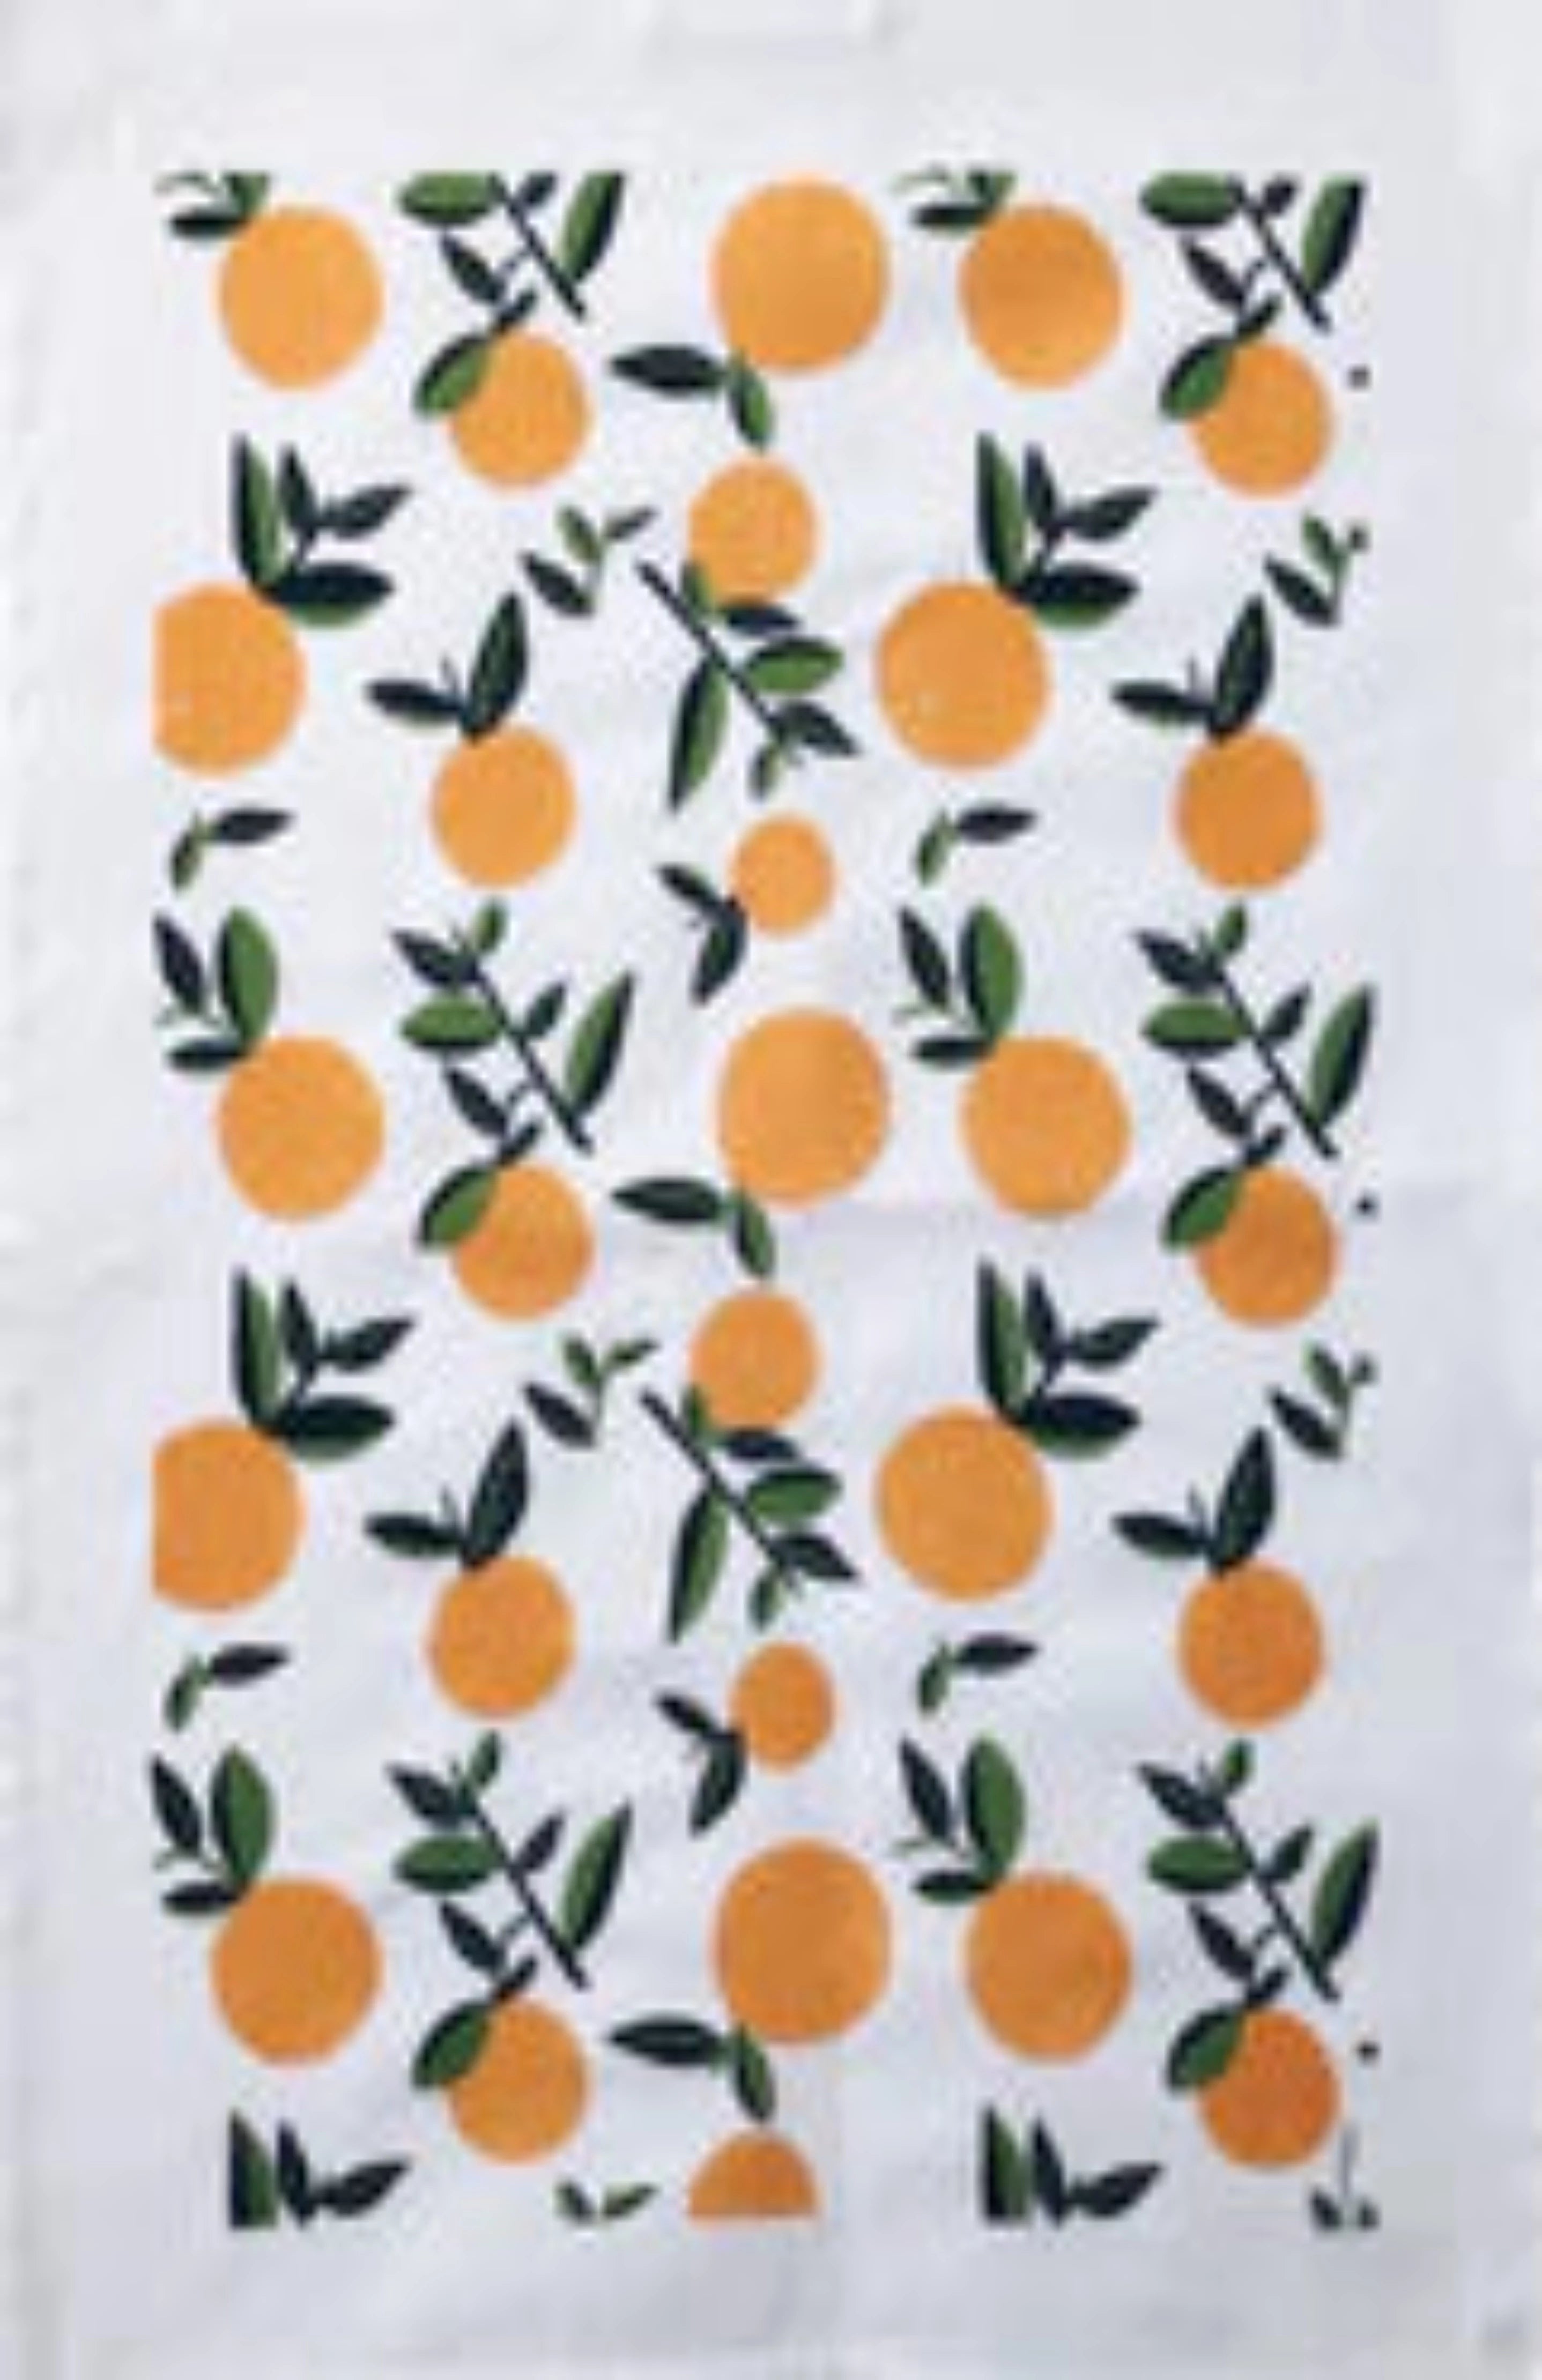 White kitchen towel with pattern of oranges with green stems 